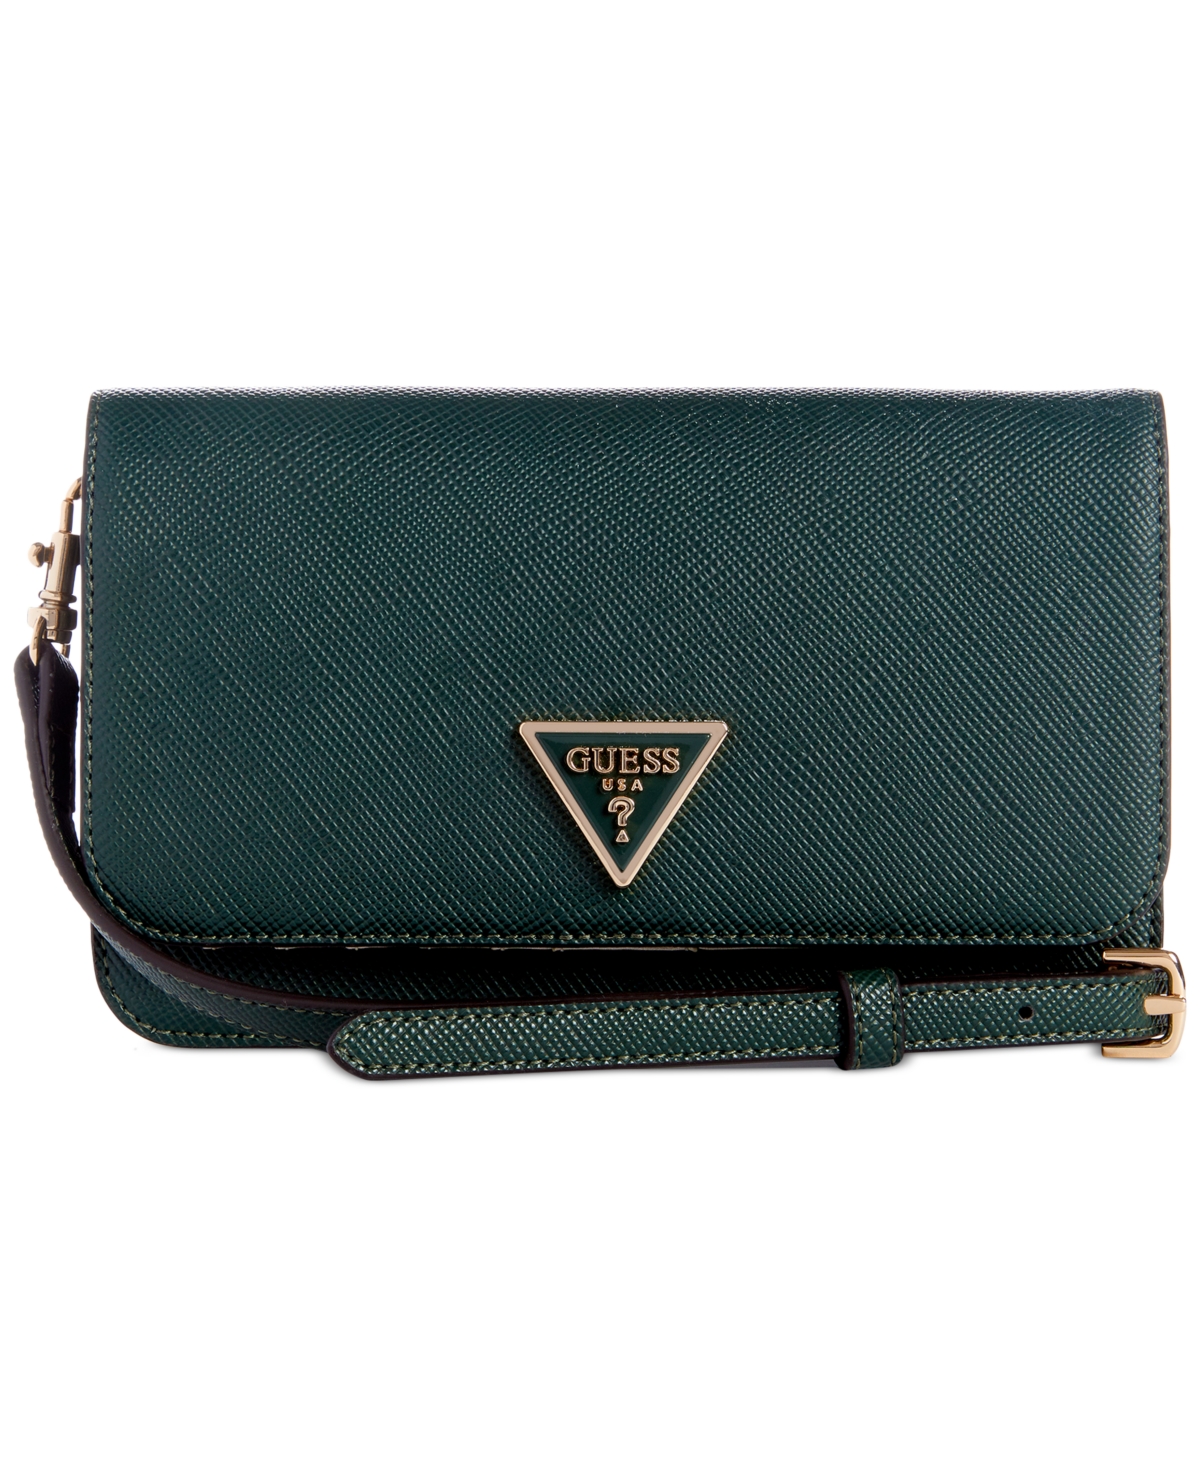 Guess Noelle Small Flap Organizer Crossbody In Forest